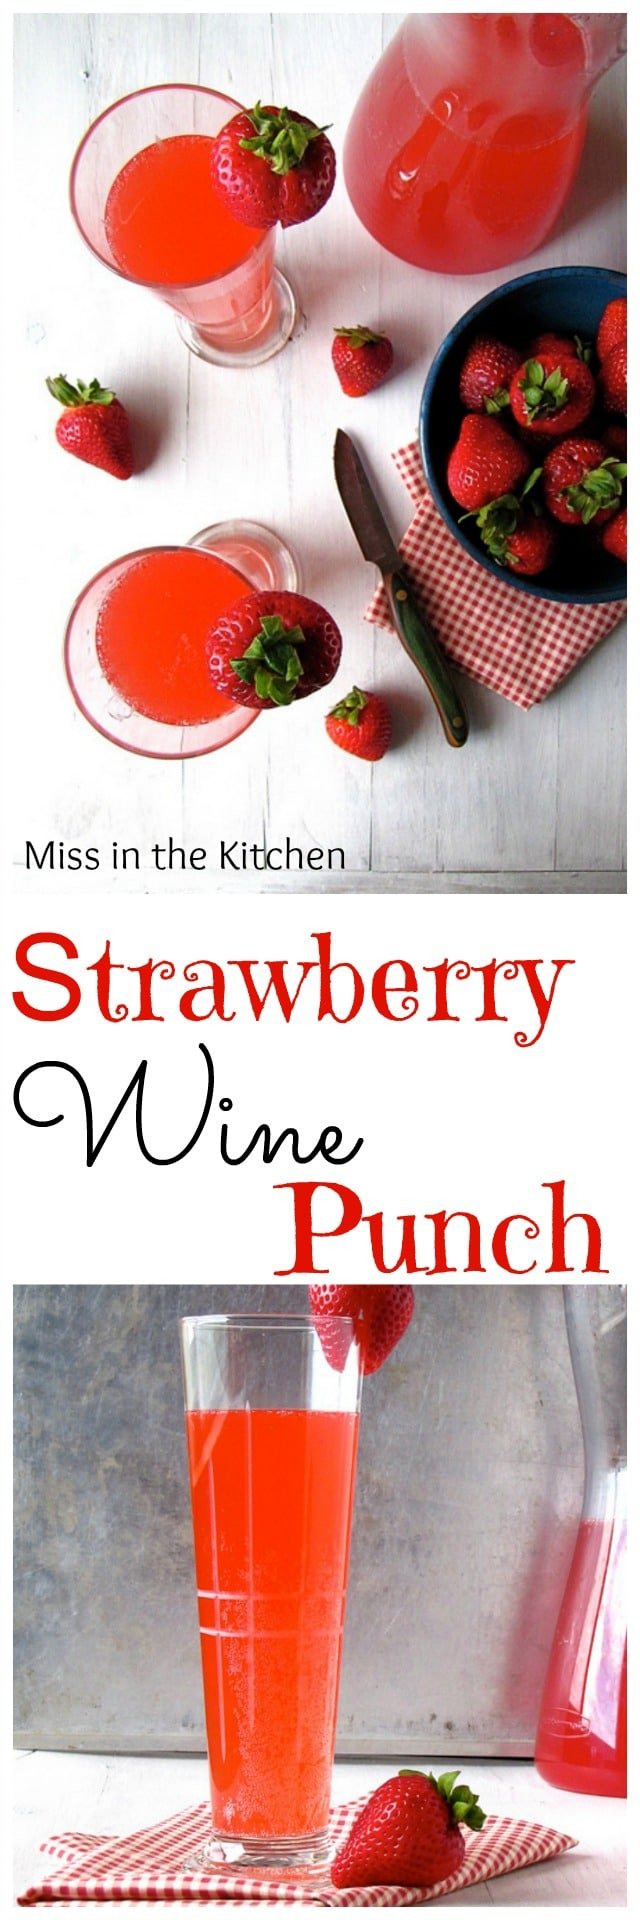 Strawberry Wine Punch Cocktail Recipe from MissintheKitchen.com